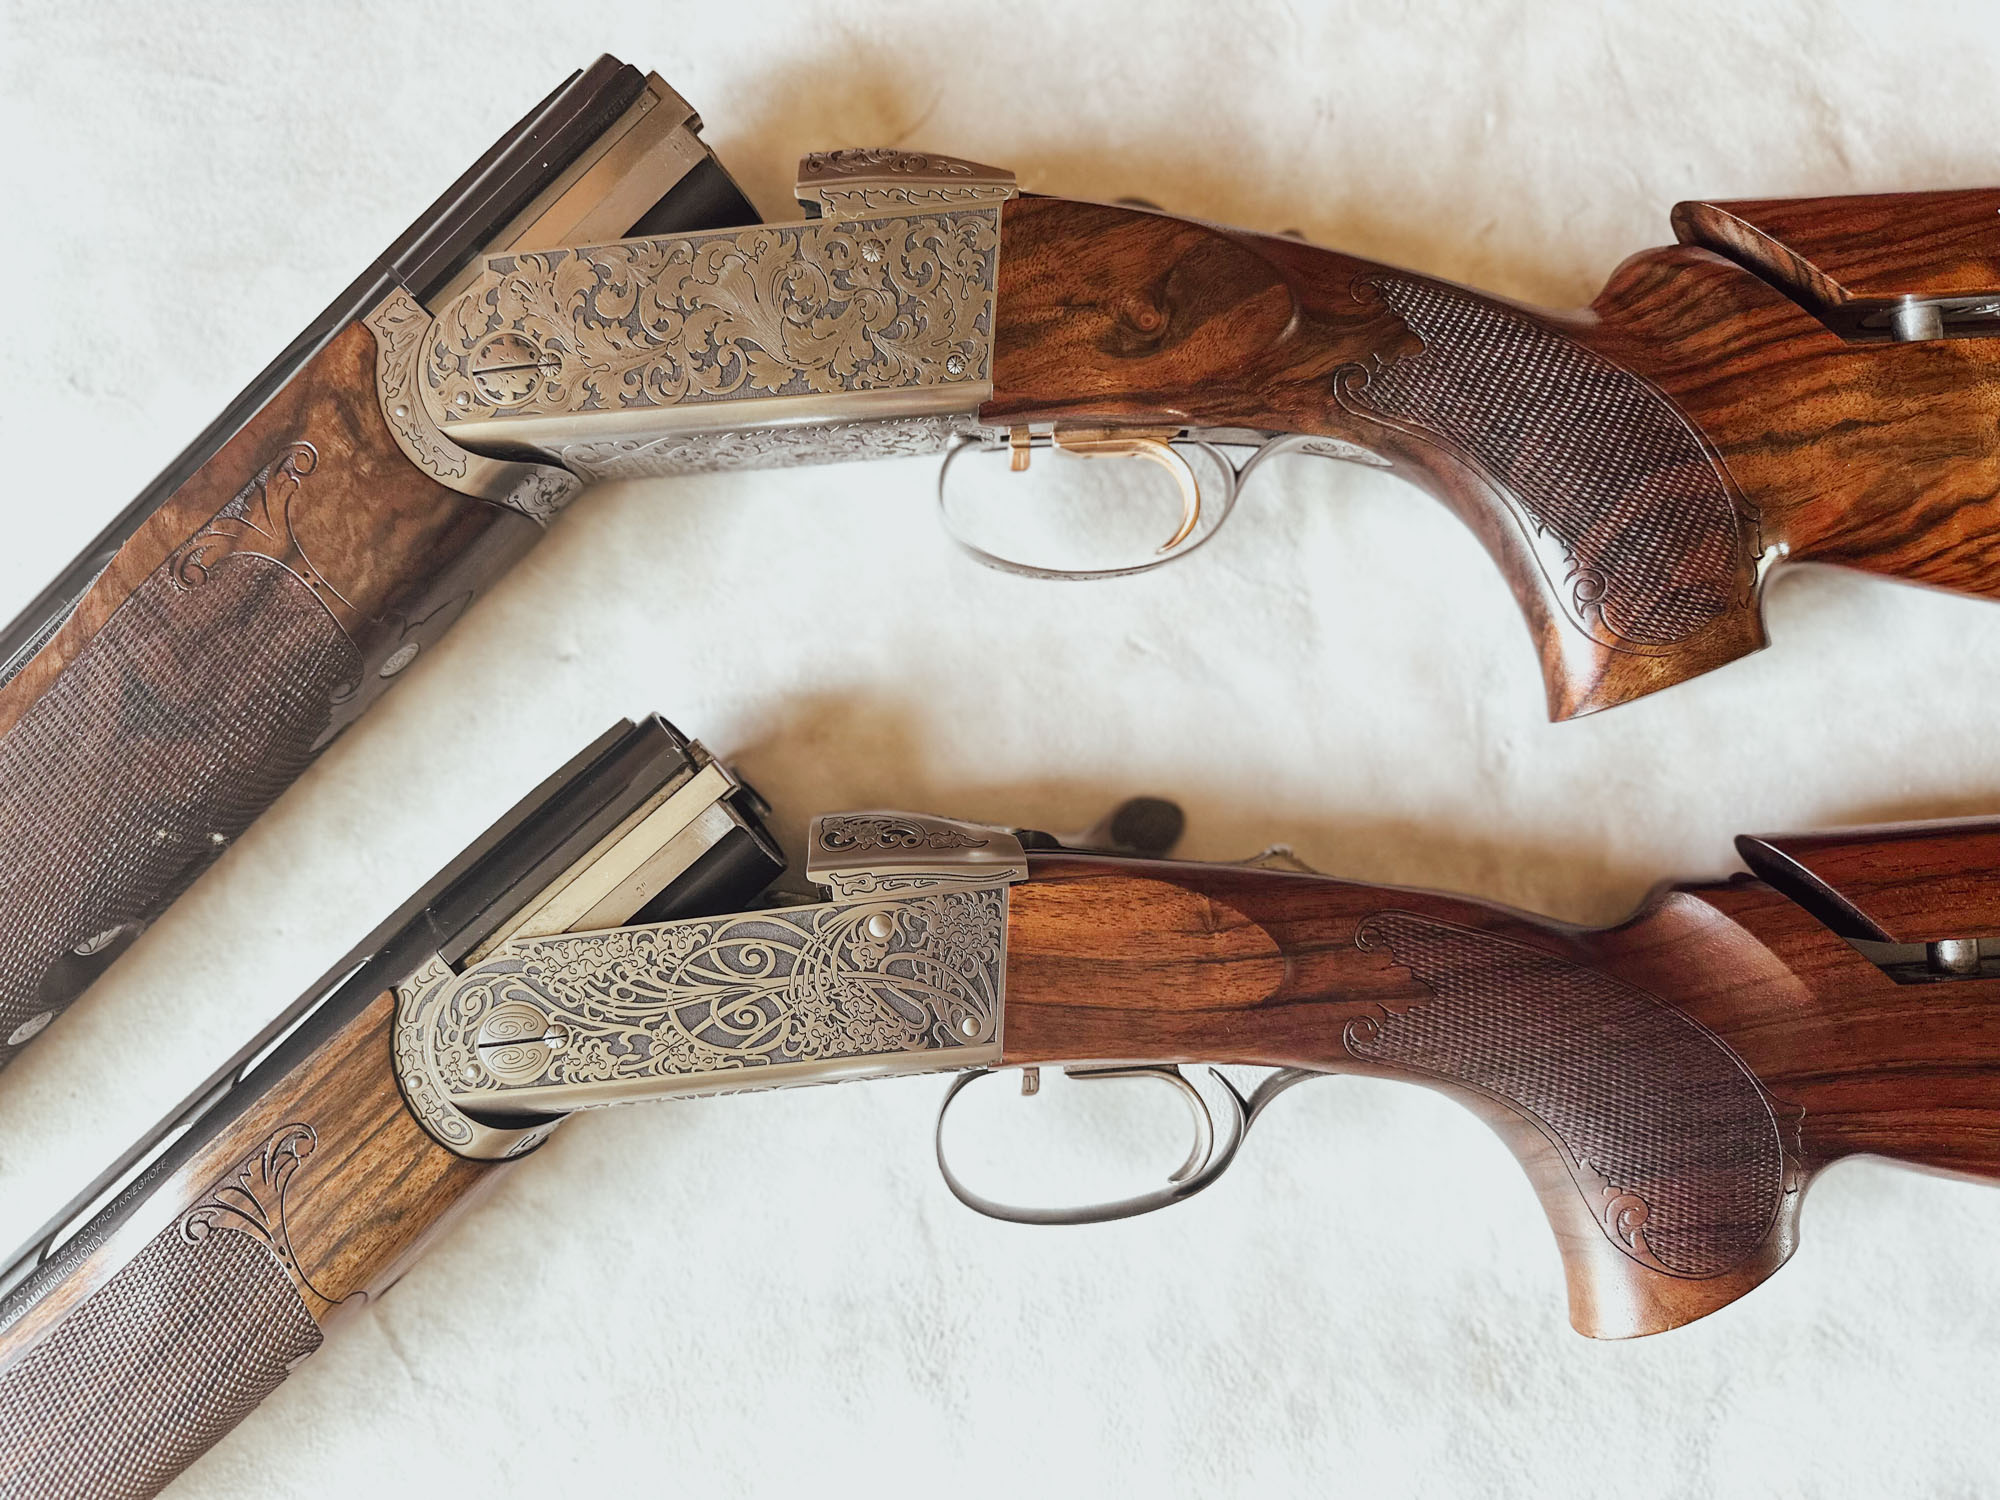 Krieghoff K-20 Victoria and Krieghoff K-80 Victoria stacked on top of each other